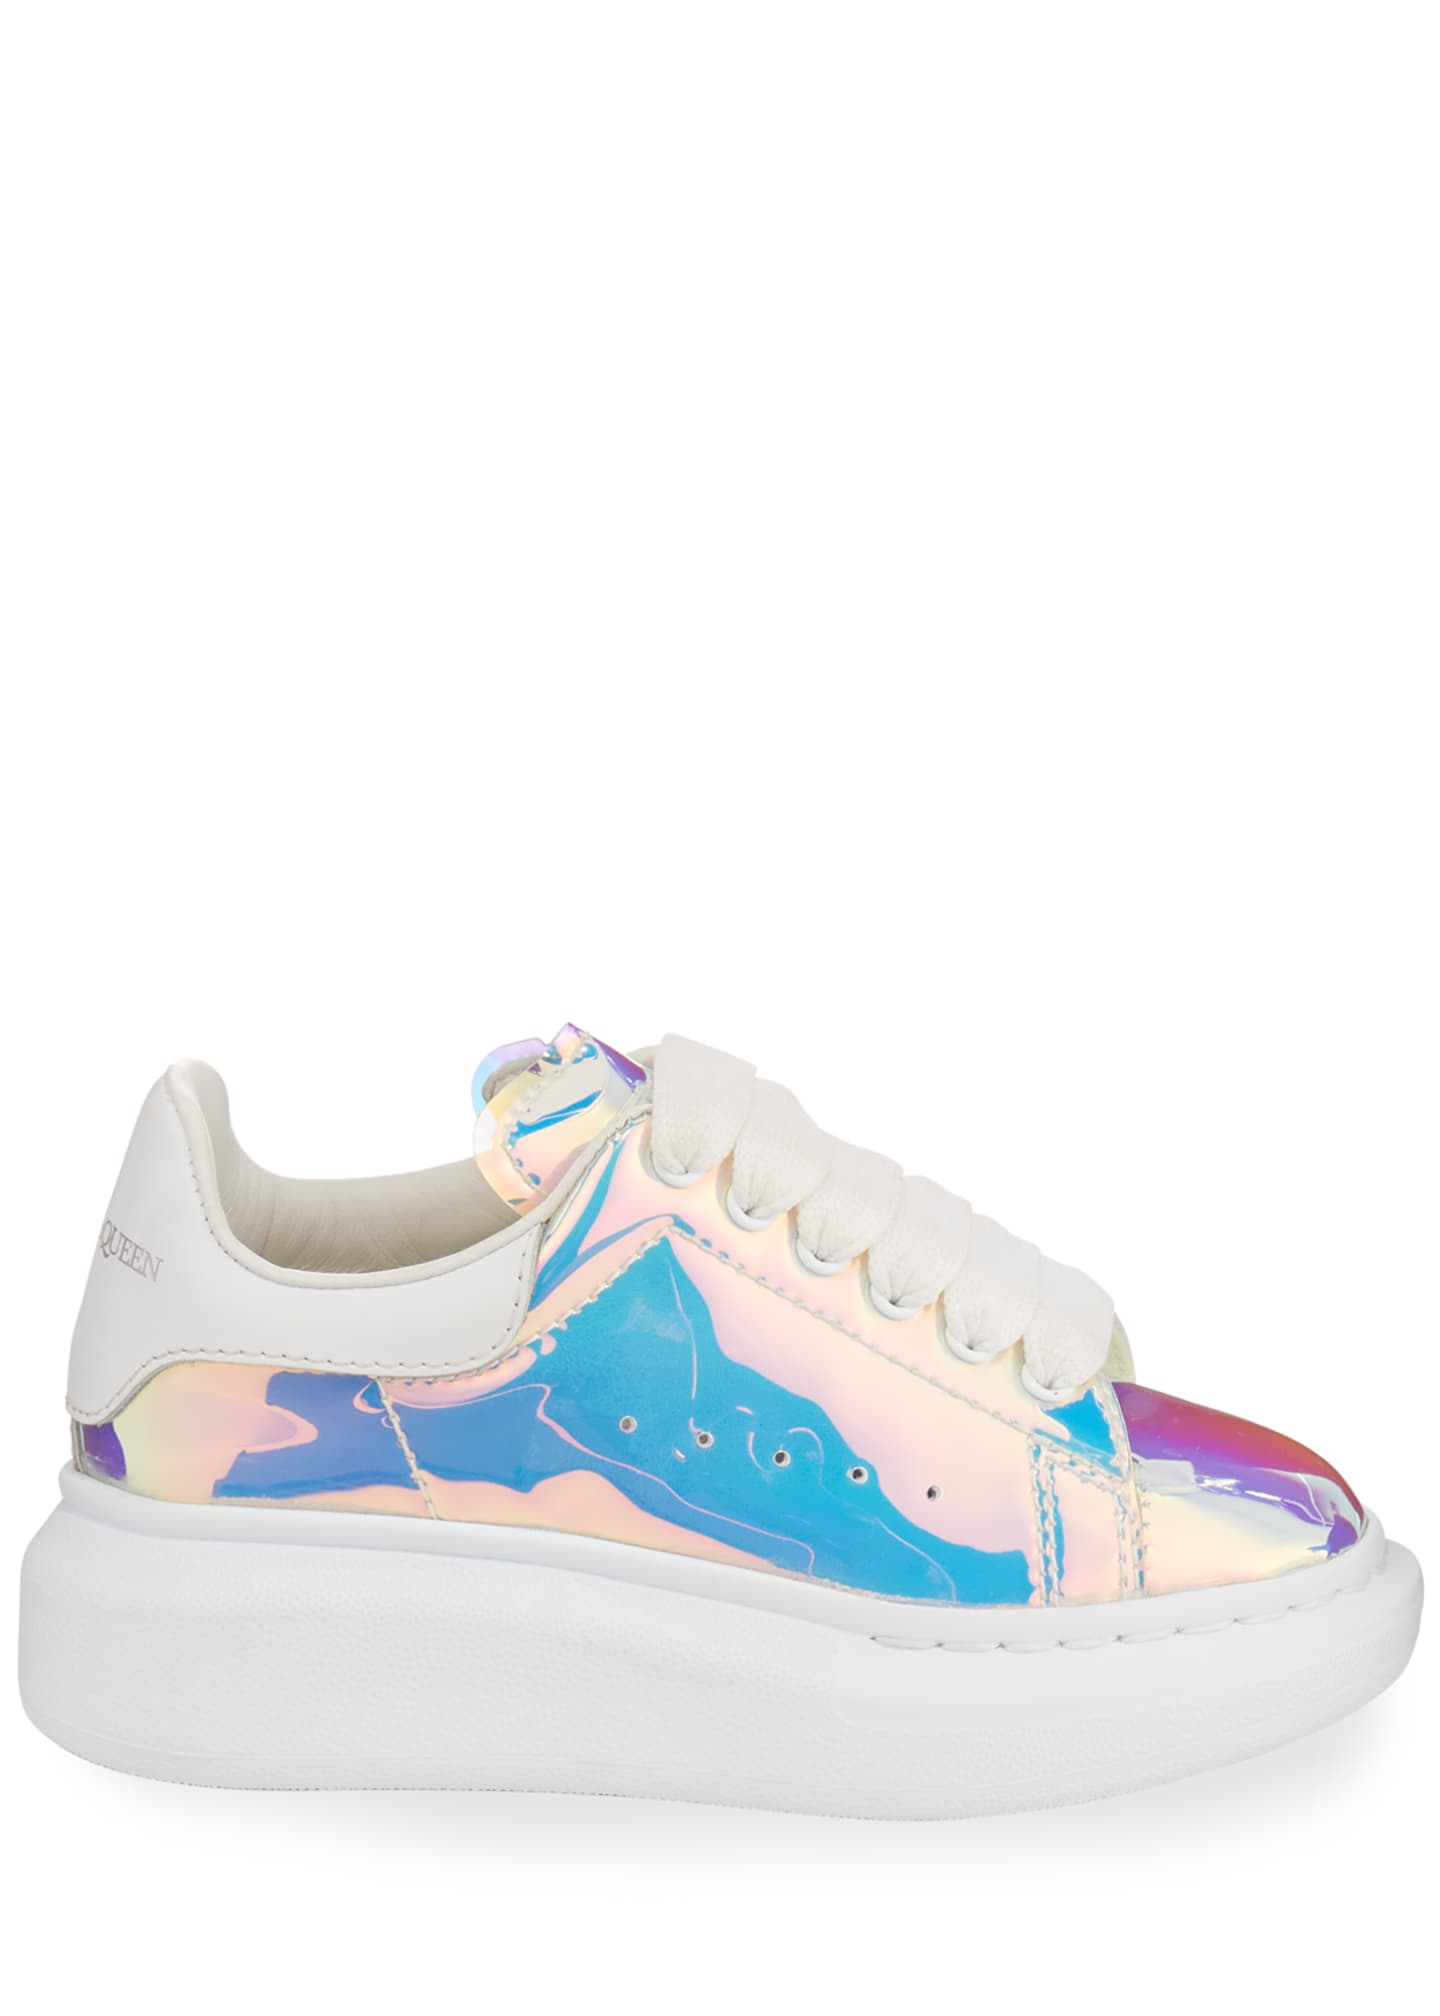 kids holographic shoes